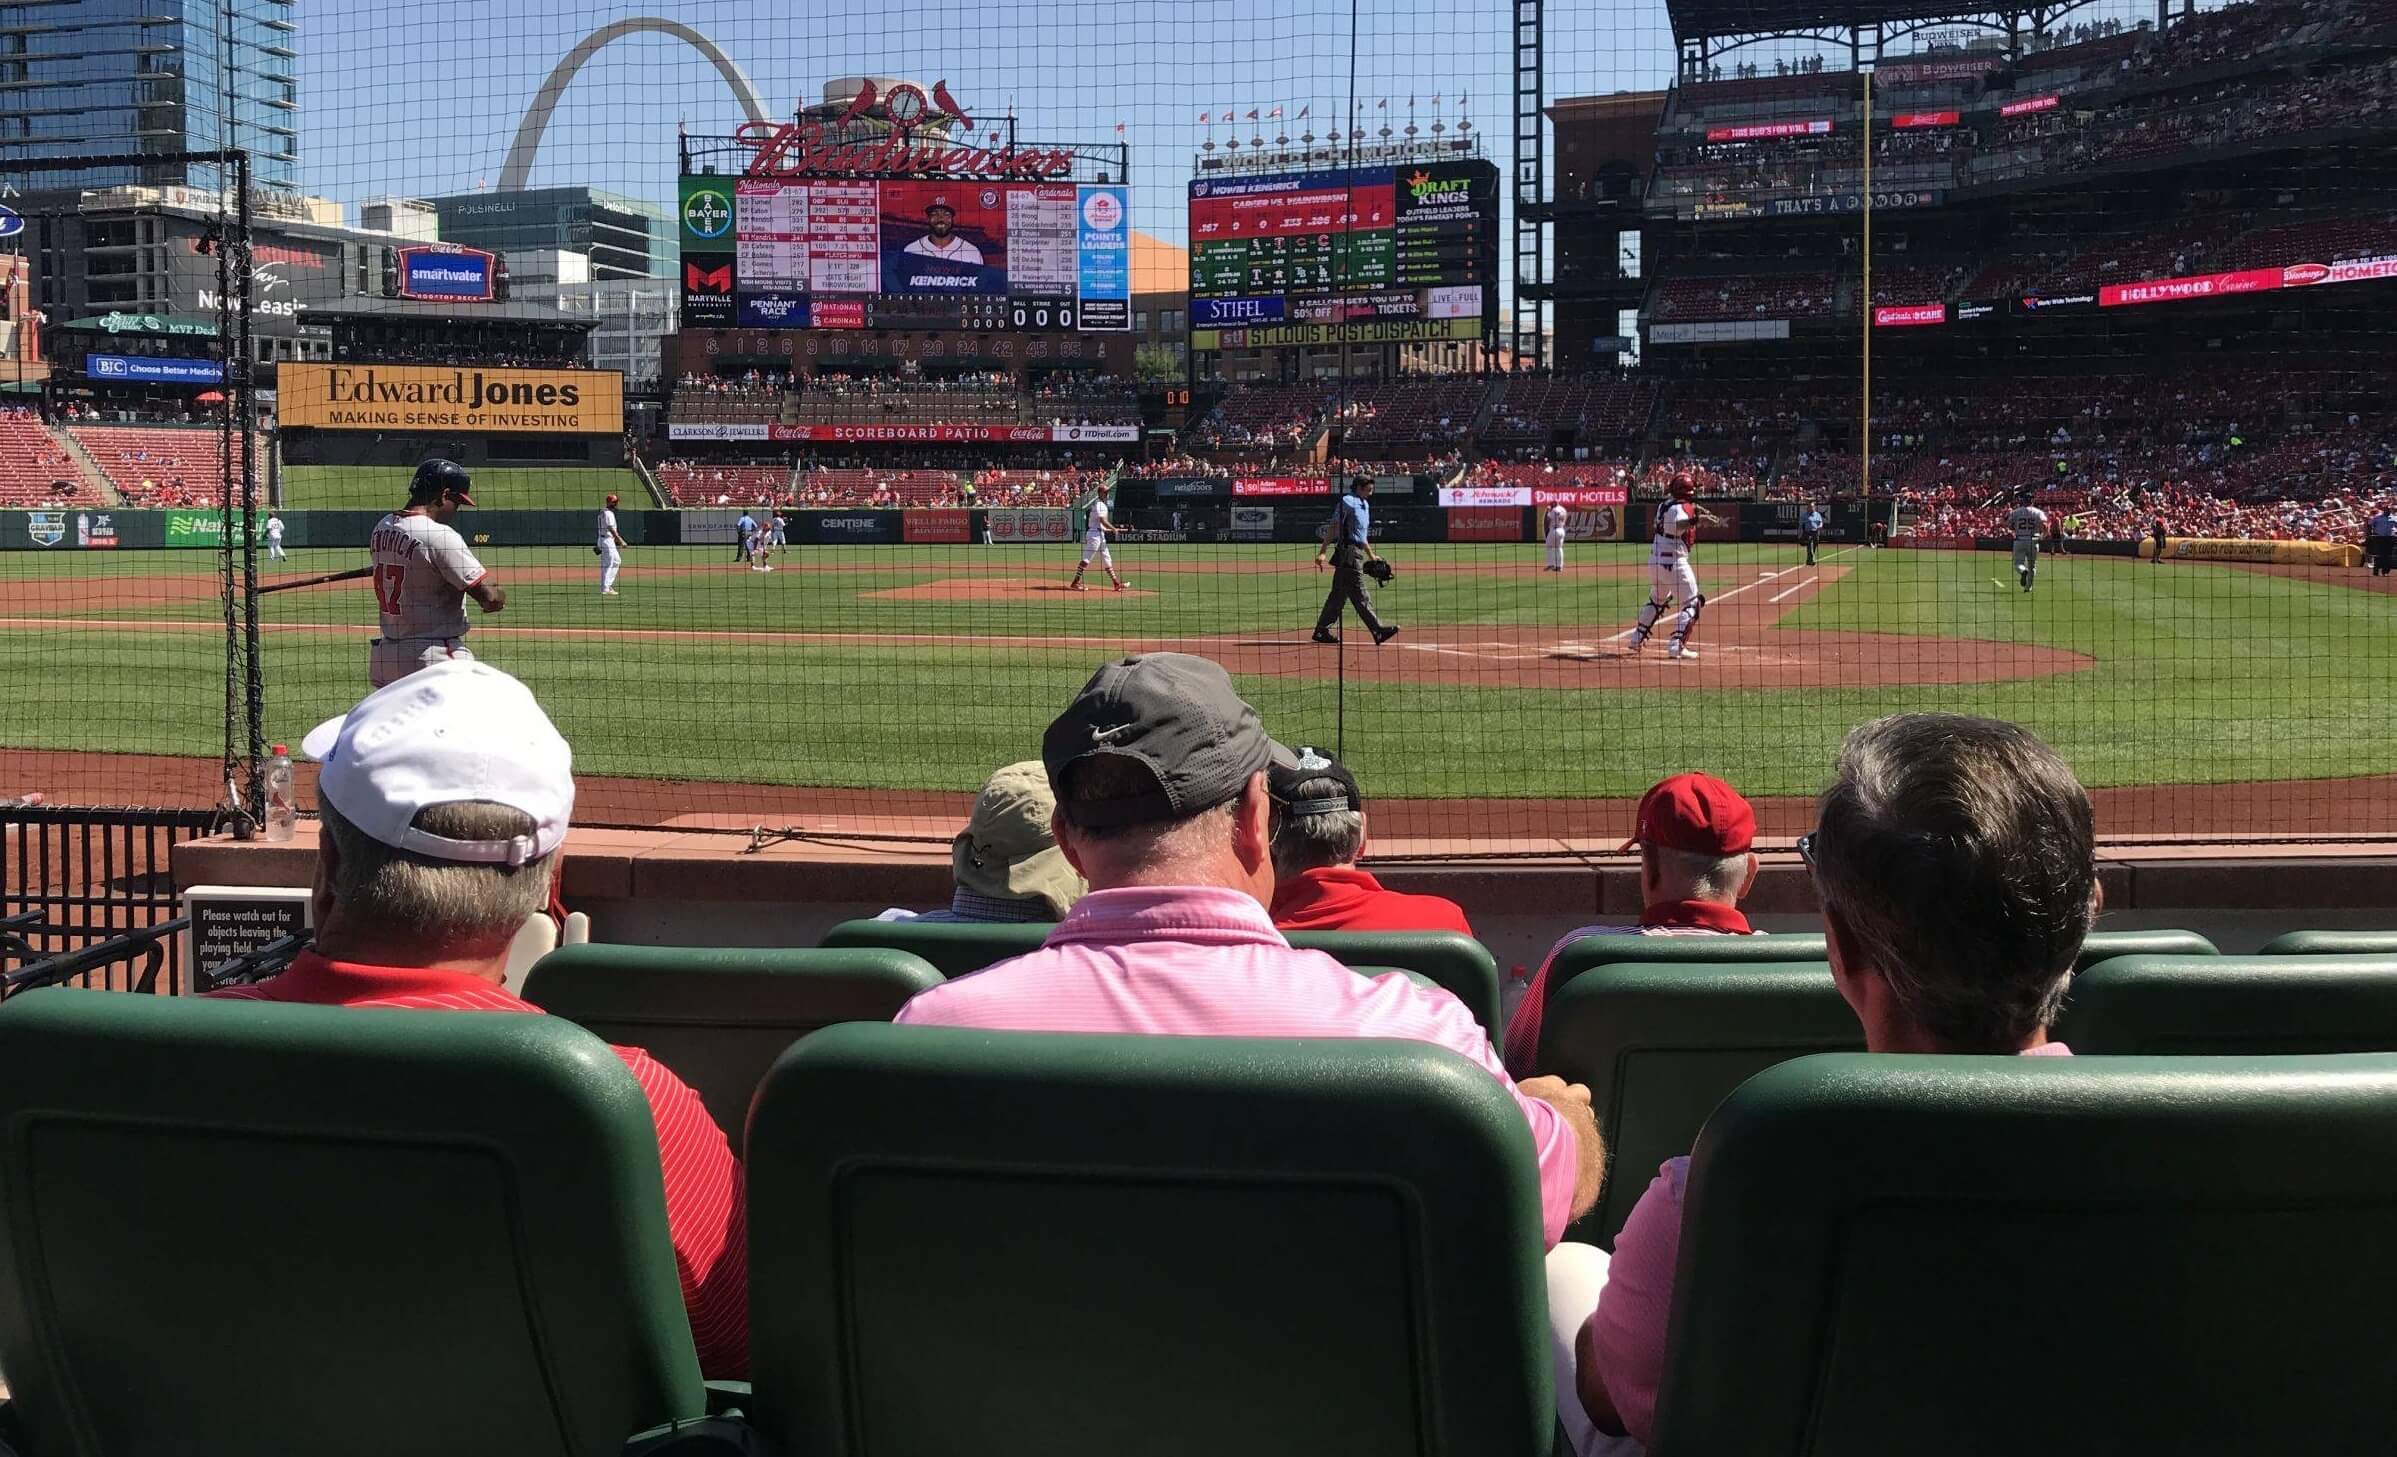 Best Seats For A Baseball Game